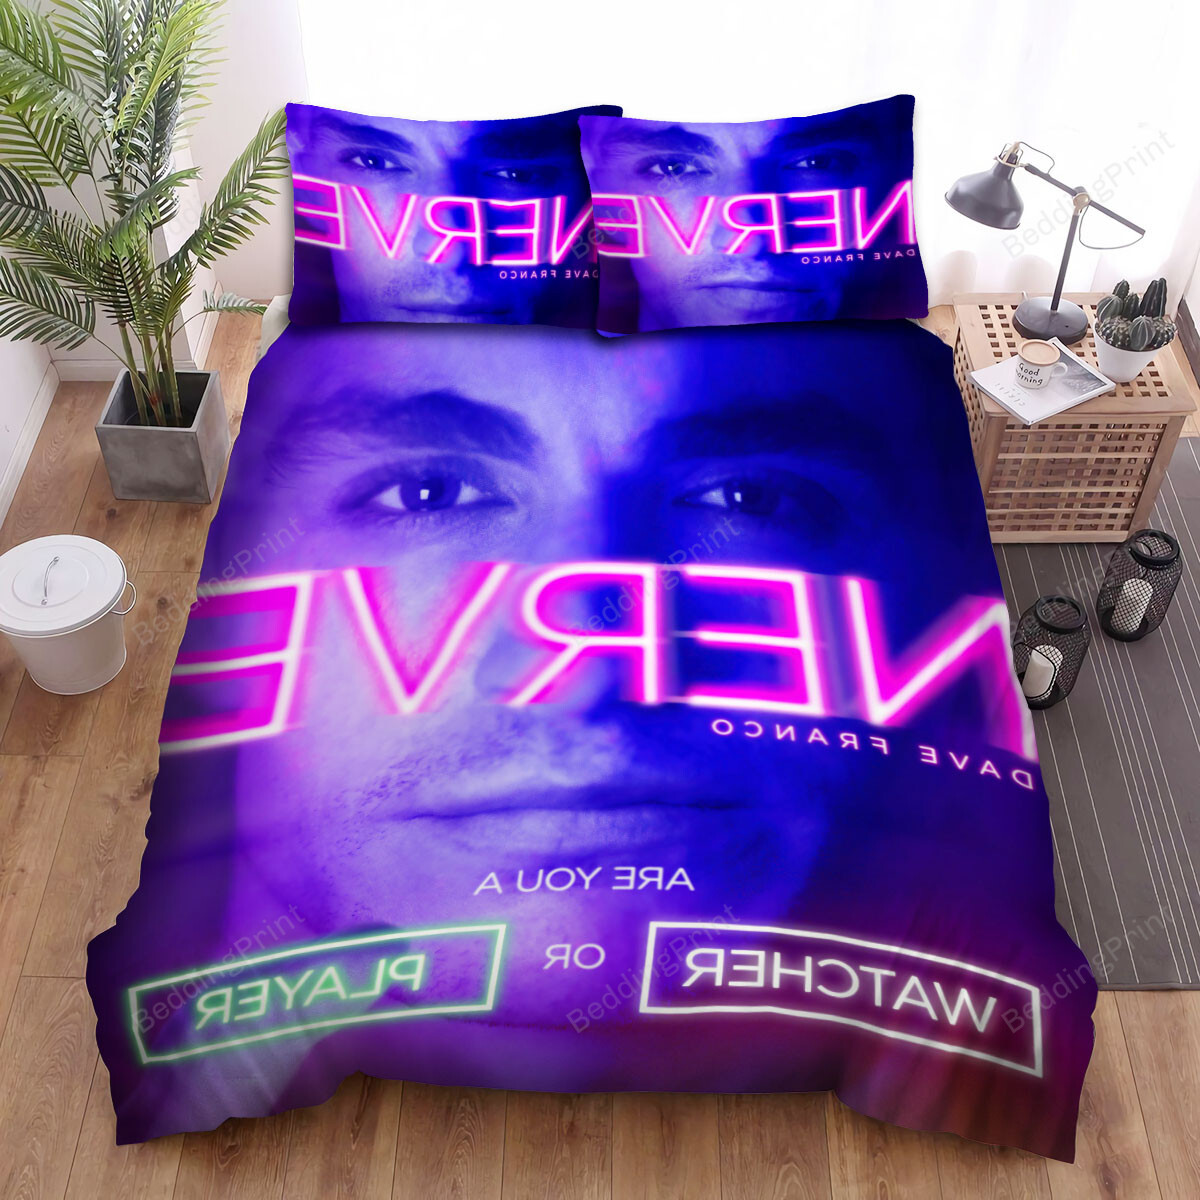 Nerve (I) (2016) Ian Are You A Watcher Or Player Movie Poster Ver 1 Bed Sheets Spread Comforter Duvet Cover Bedding Sets